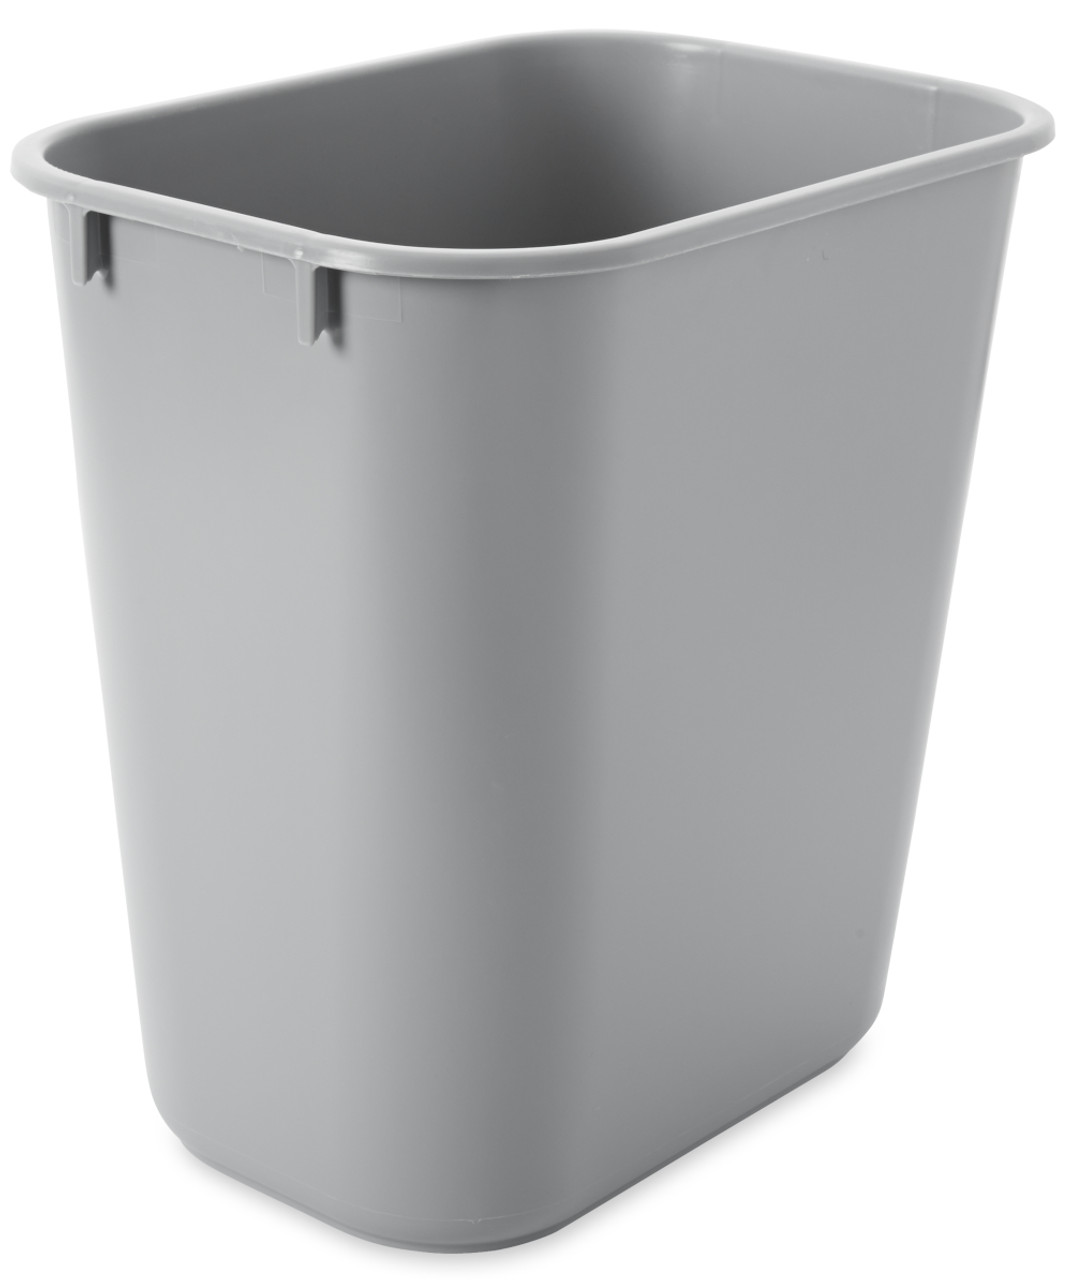 FG295500GRAY - Tapered design and rolled rim facilitates stacking for space-efficient storage